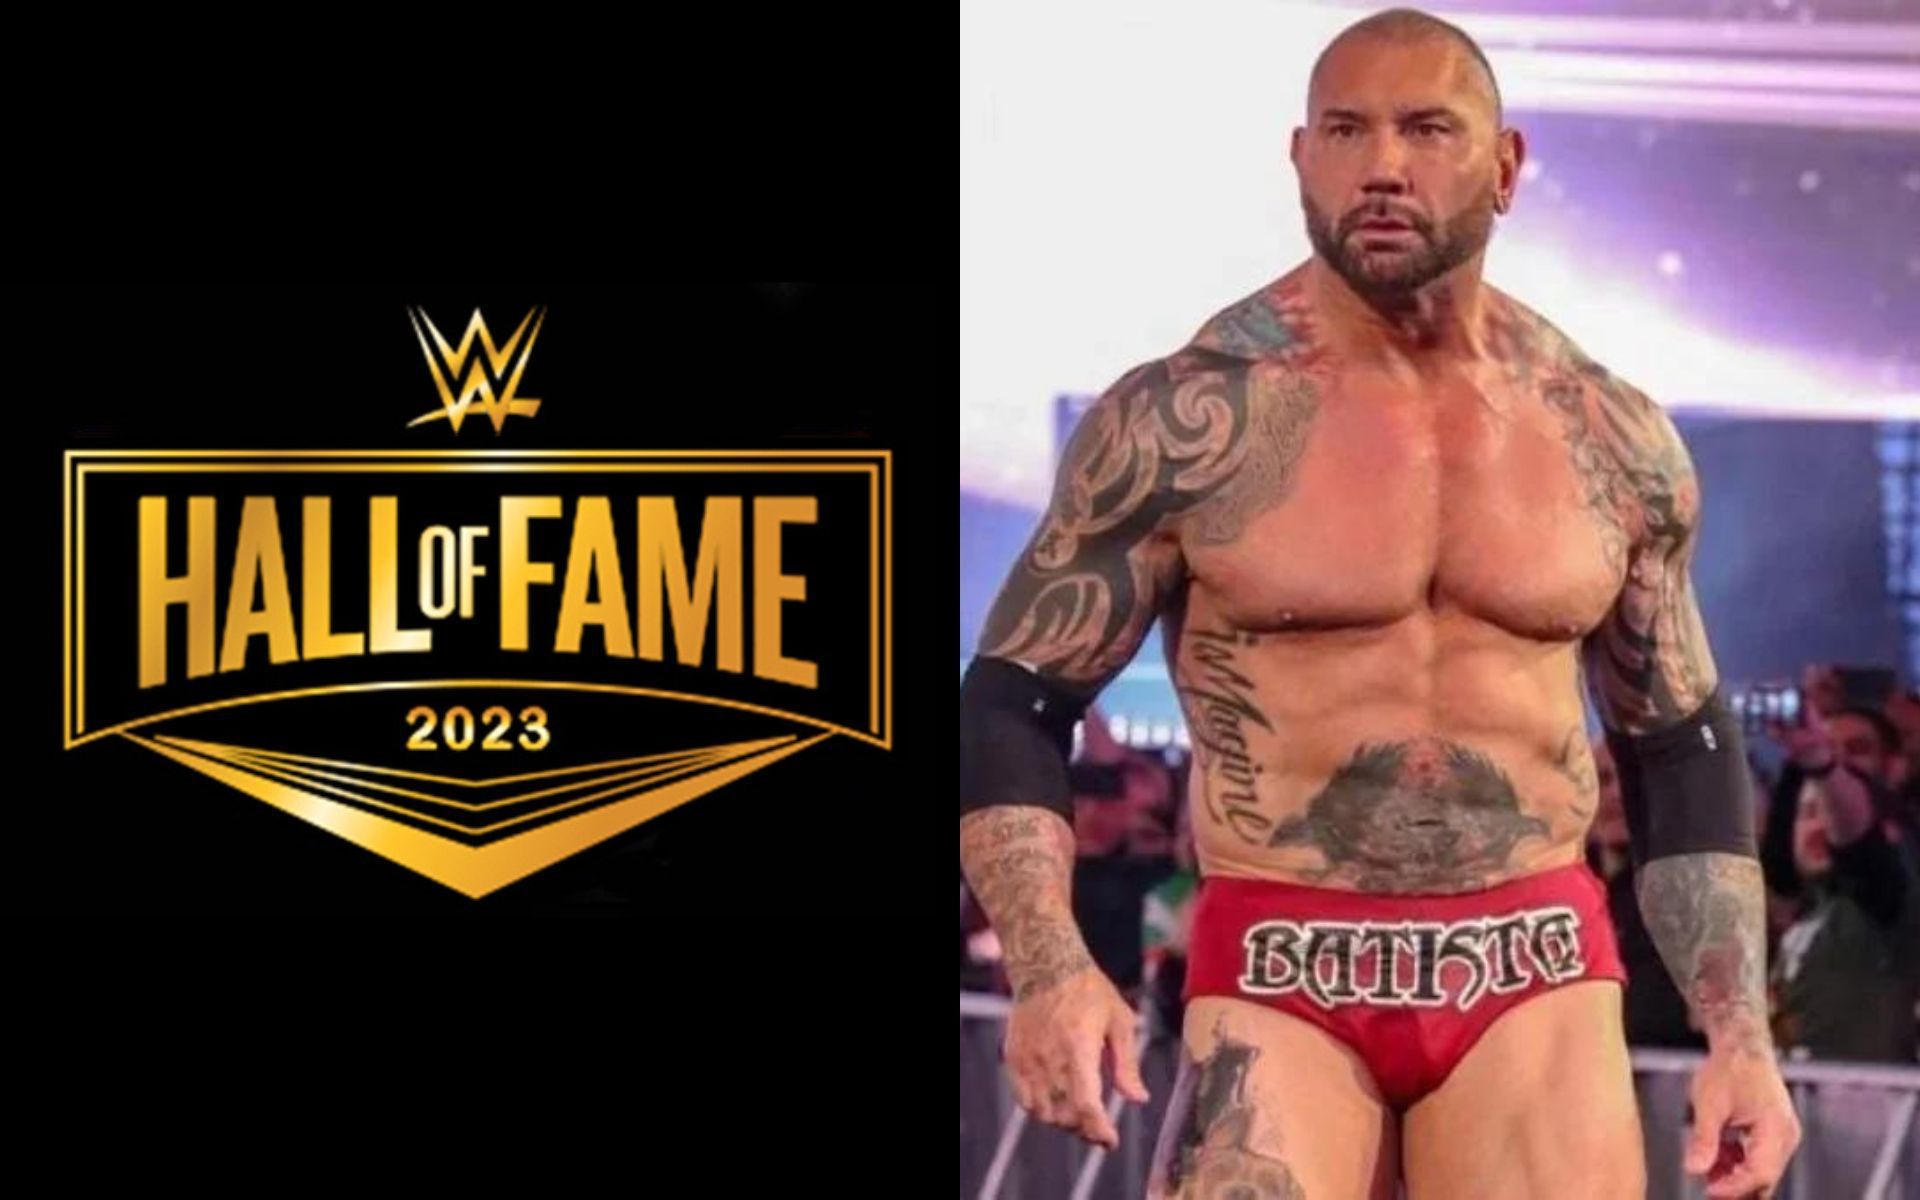 Batista has gone Hollywood, and so will WWE!